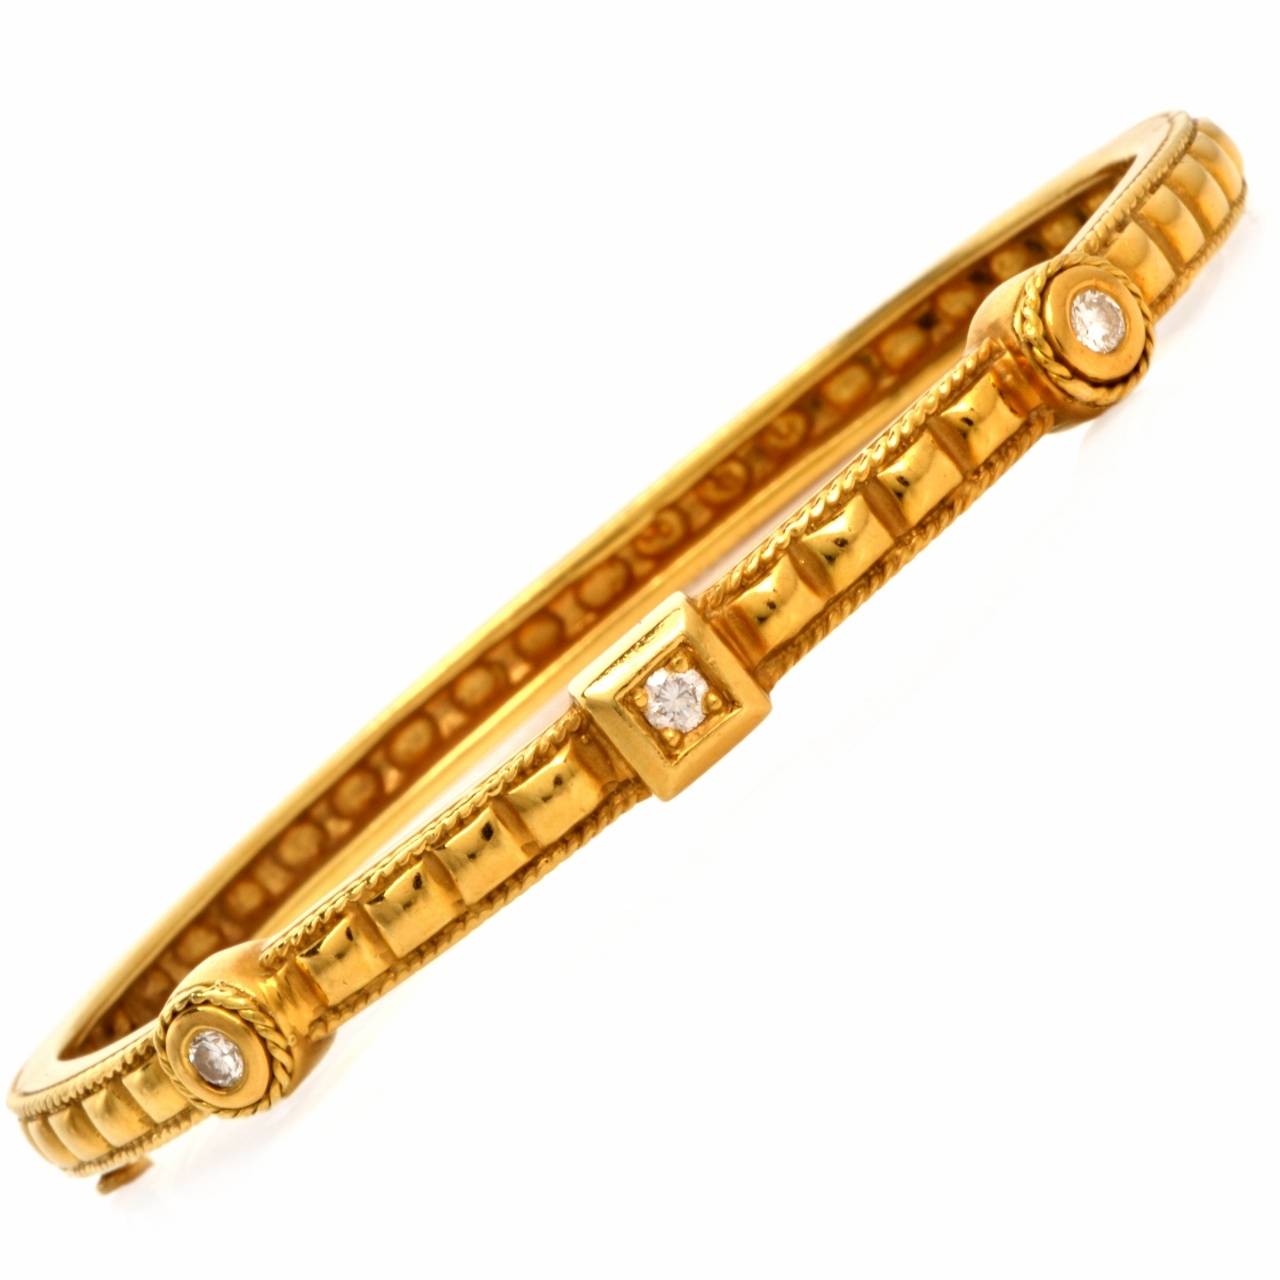 This 1930's bangle bracelet of refined aesthetic is crafted in solid 18K yellow gold, weighs 23.9 grams and measures approx. 6 1/4